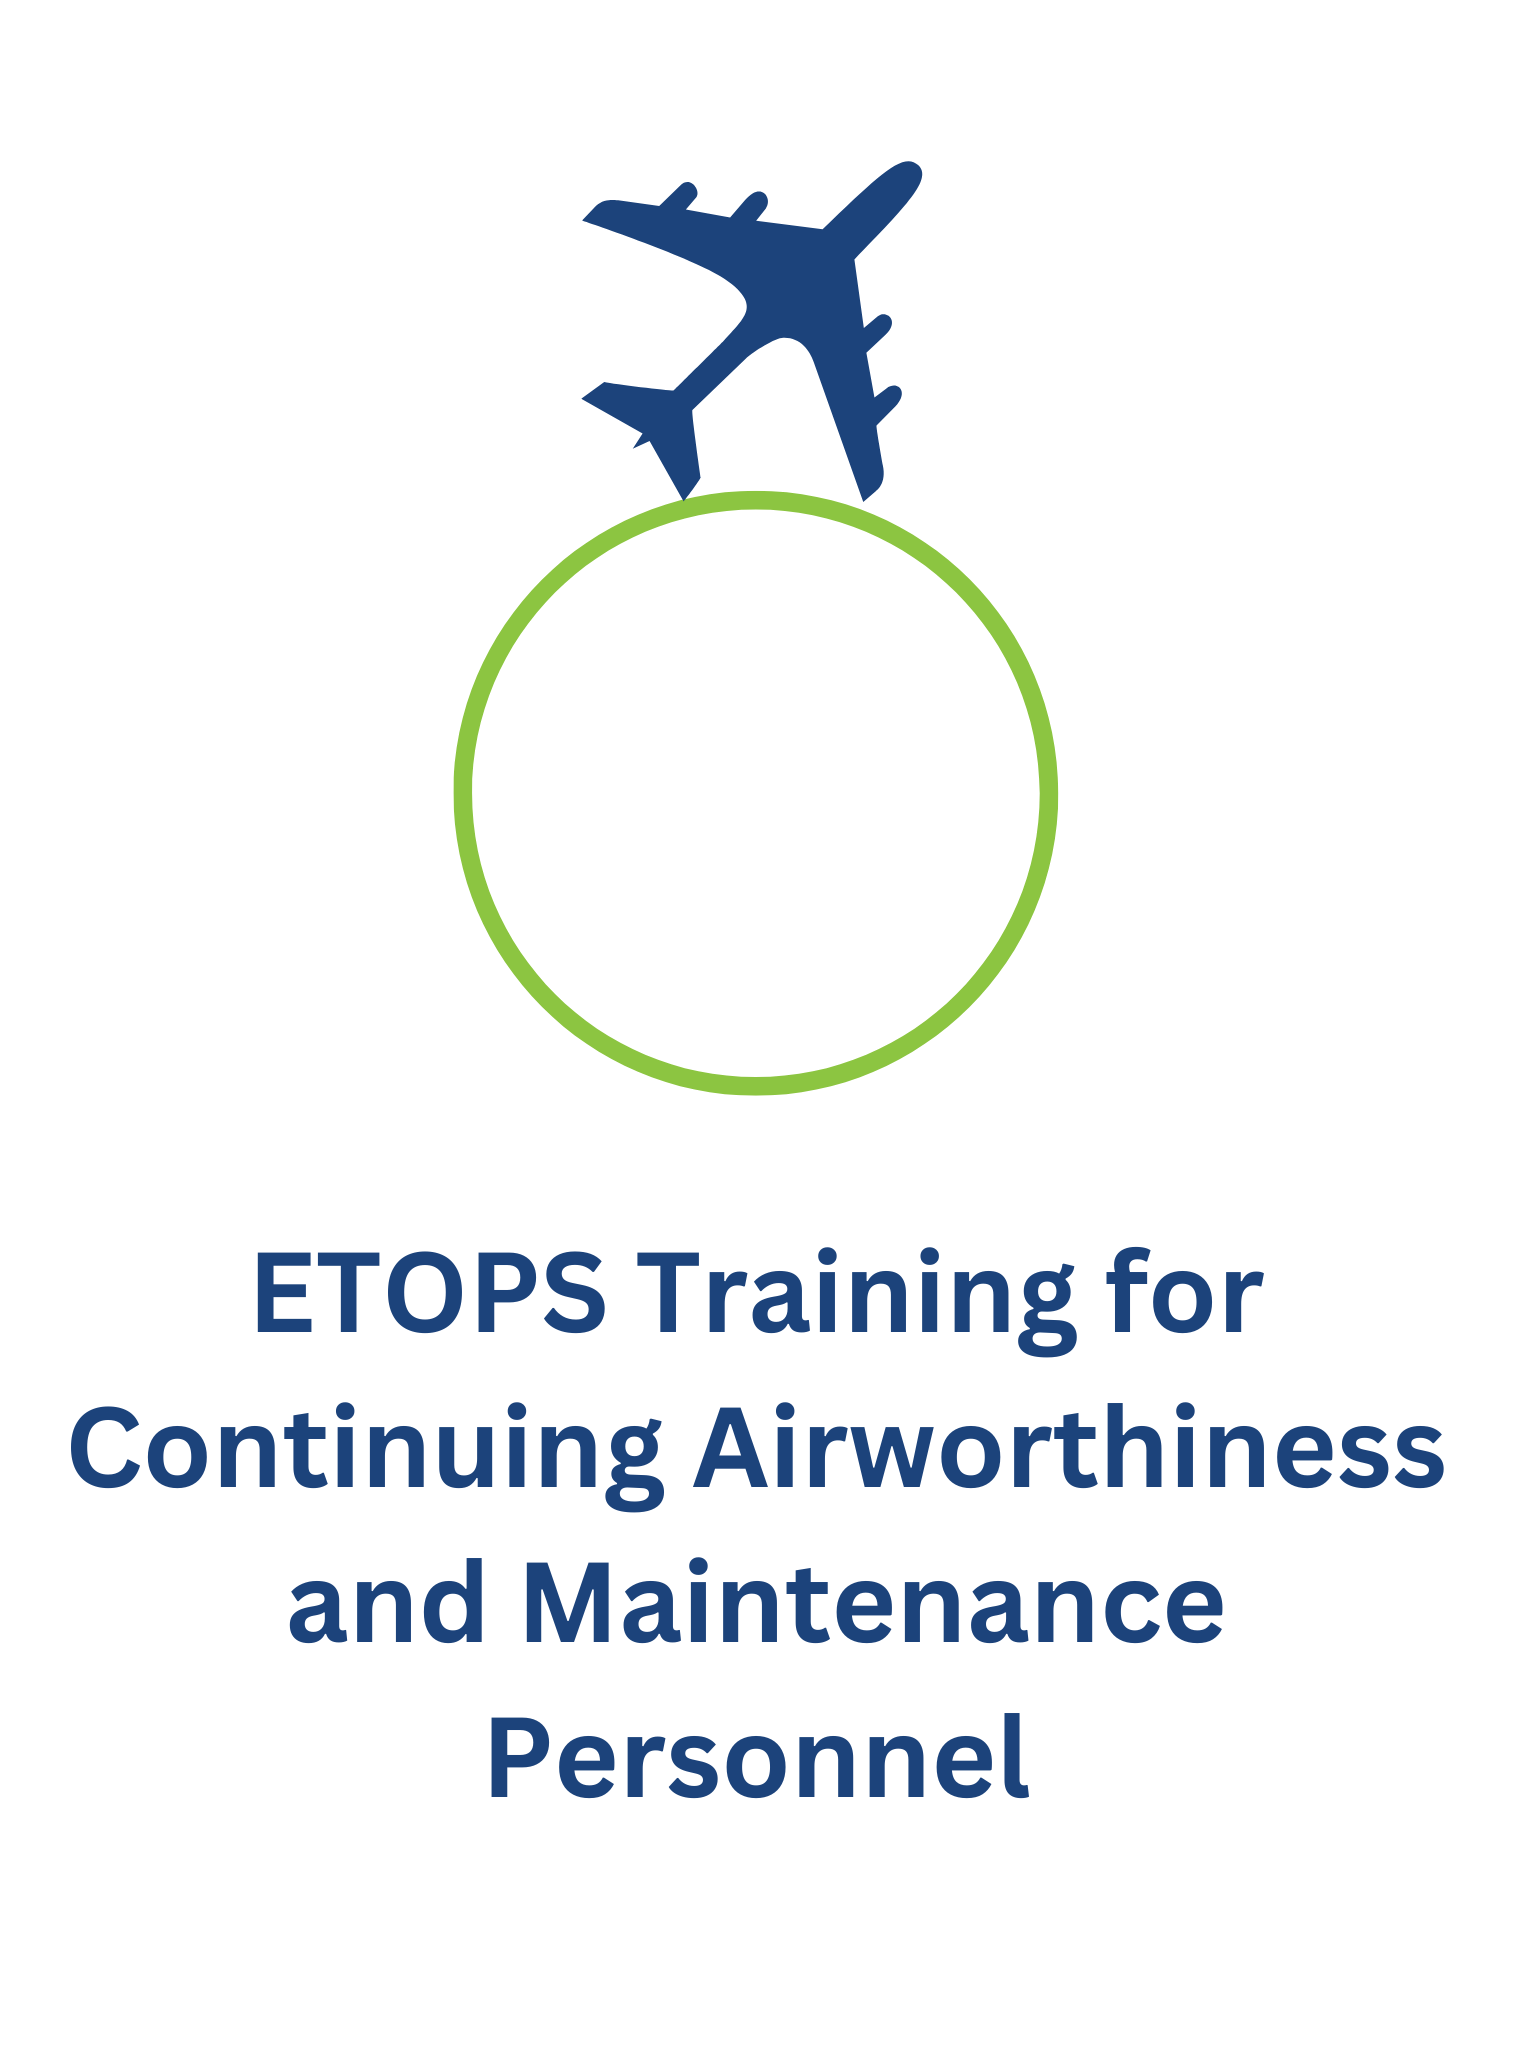 ETOPS Training for Continuing Airworthiness and Maintenance Personnel